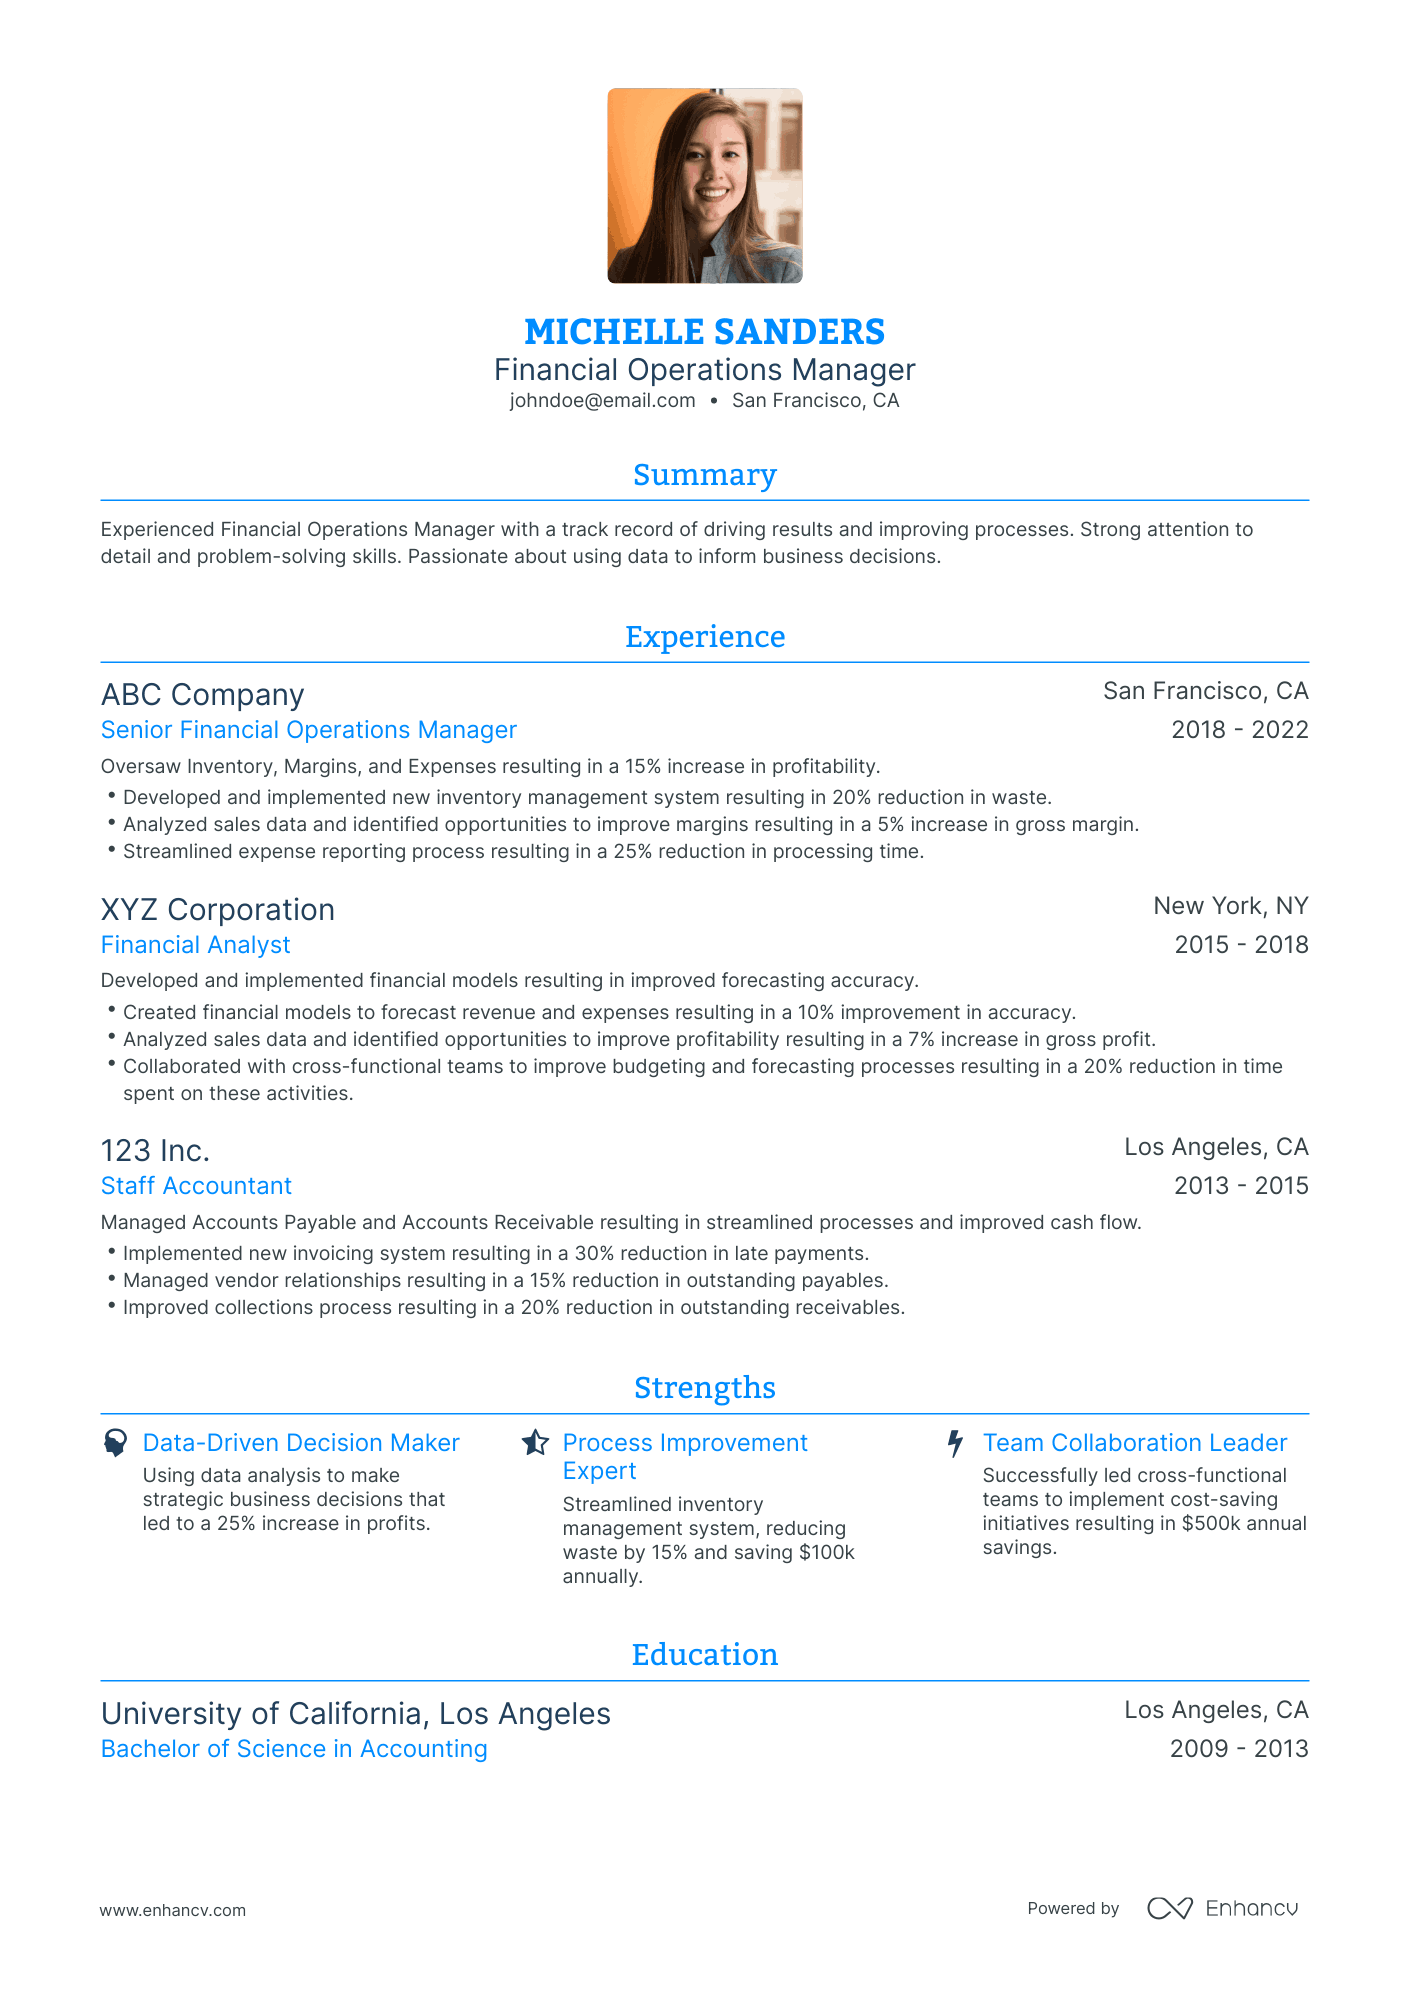 Traditional Financial Operations Manager Resume Template